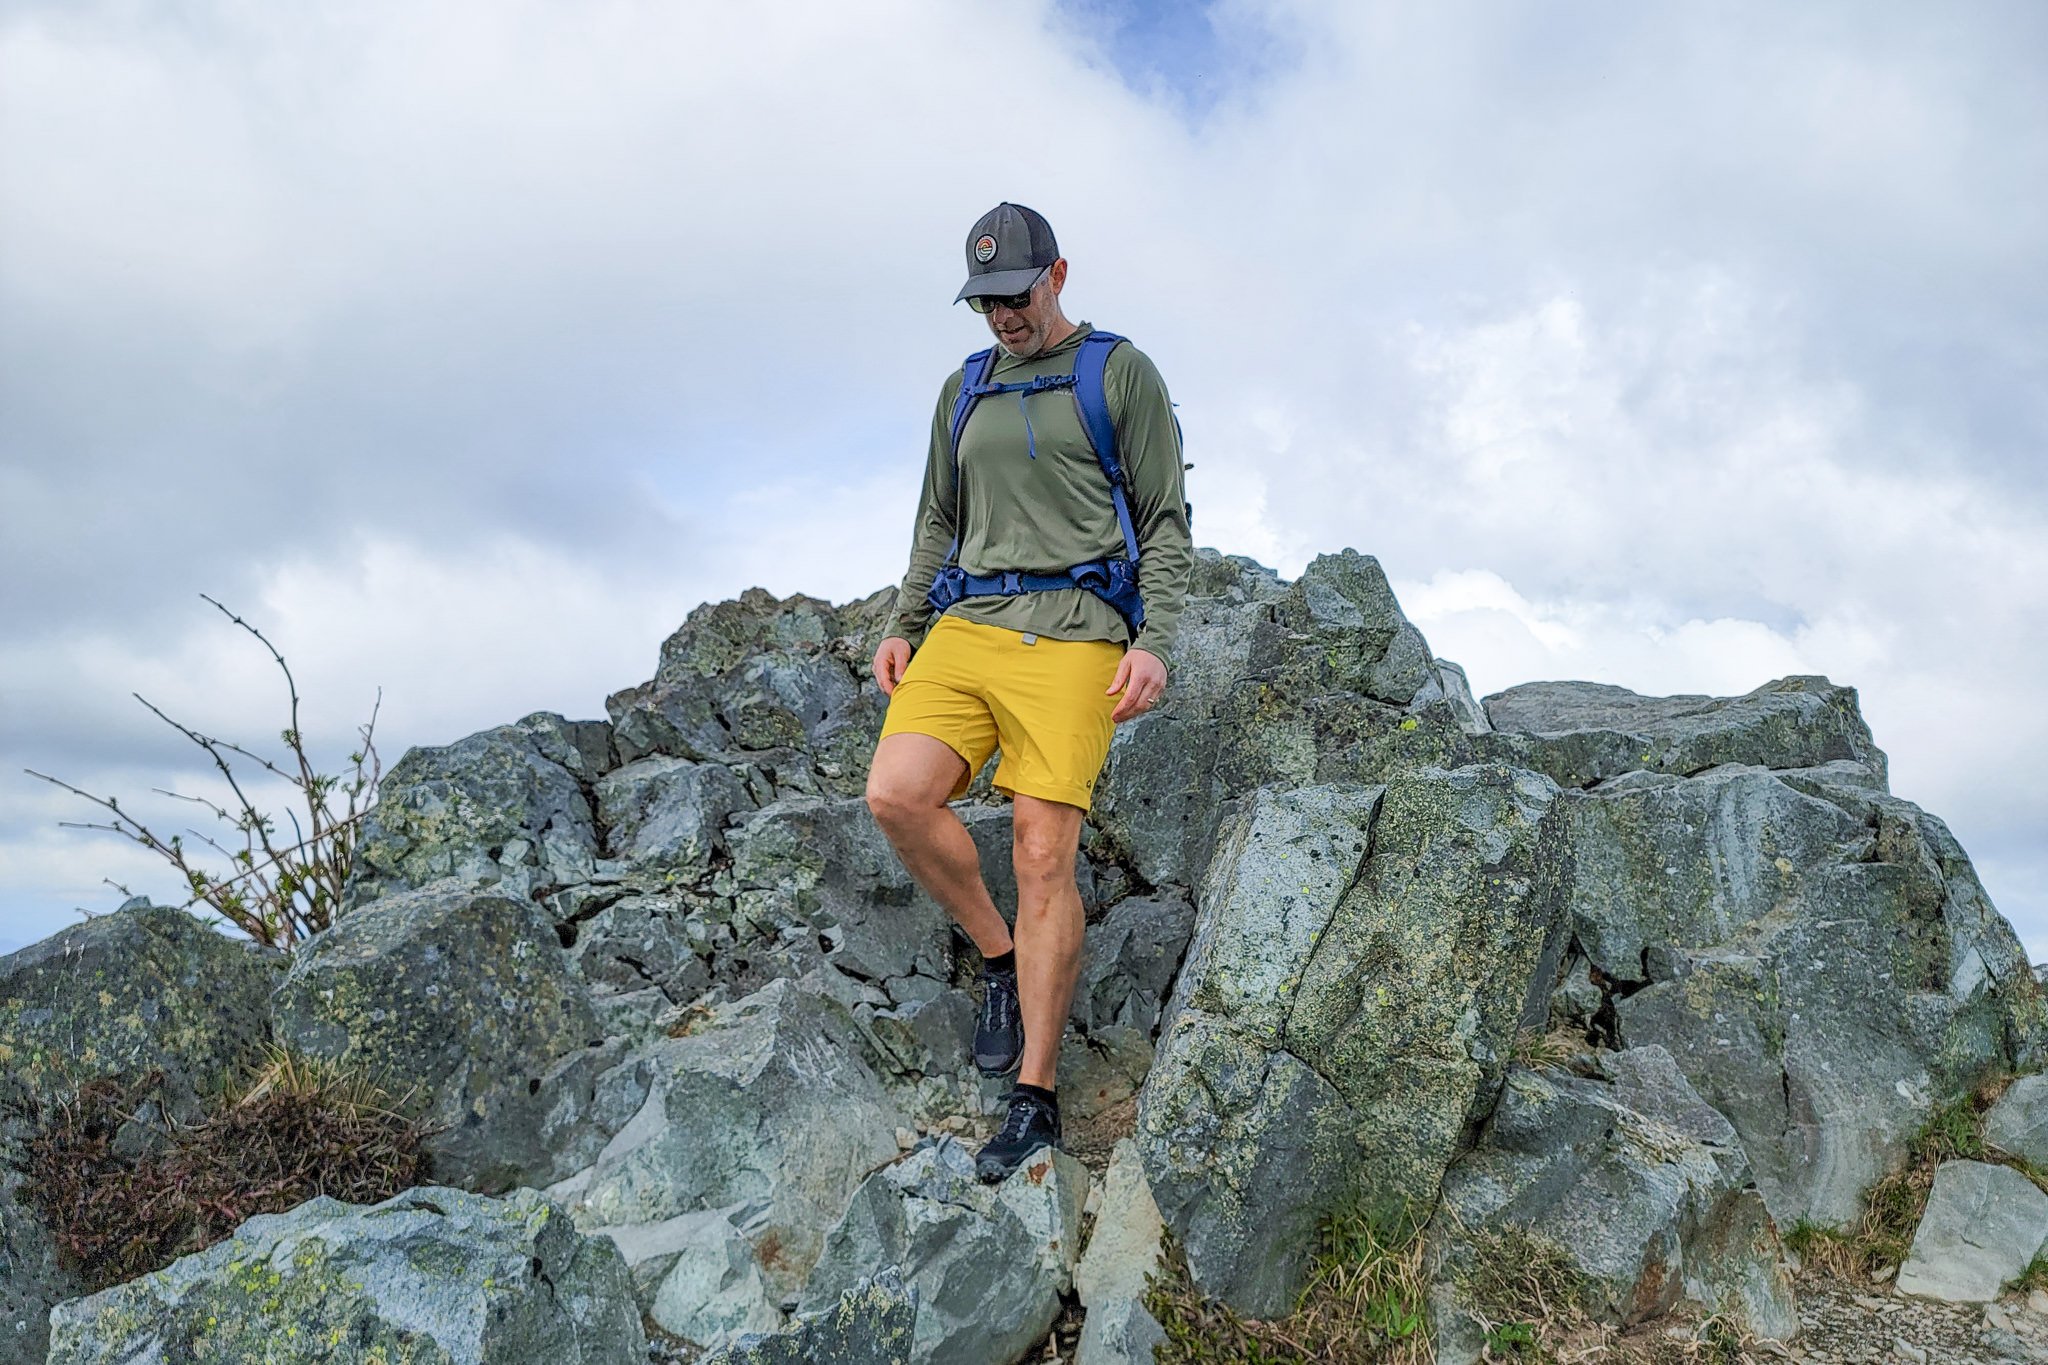 A hiker coming down some rocks wearing Outdoor Research Ferrosi shorts